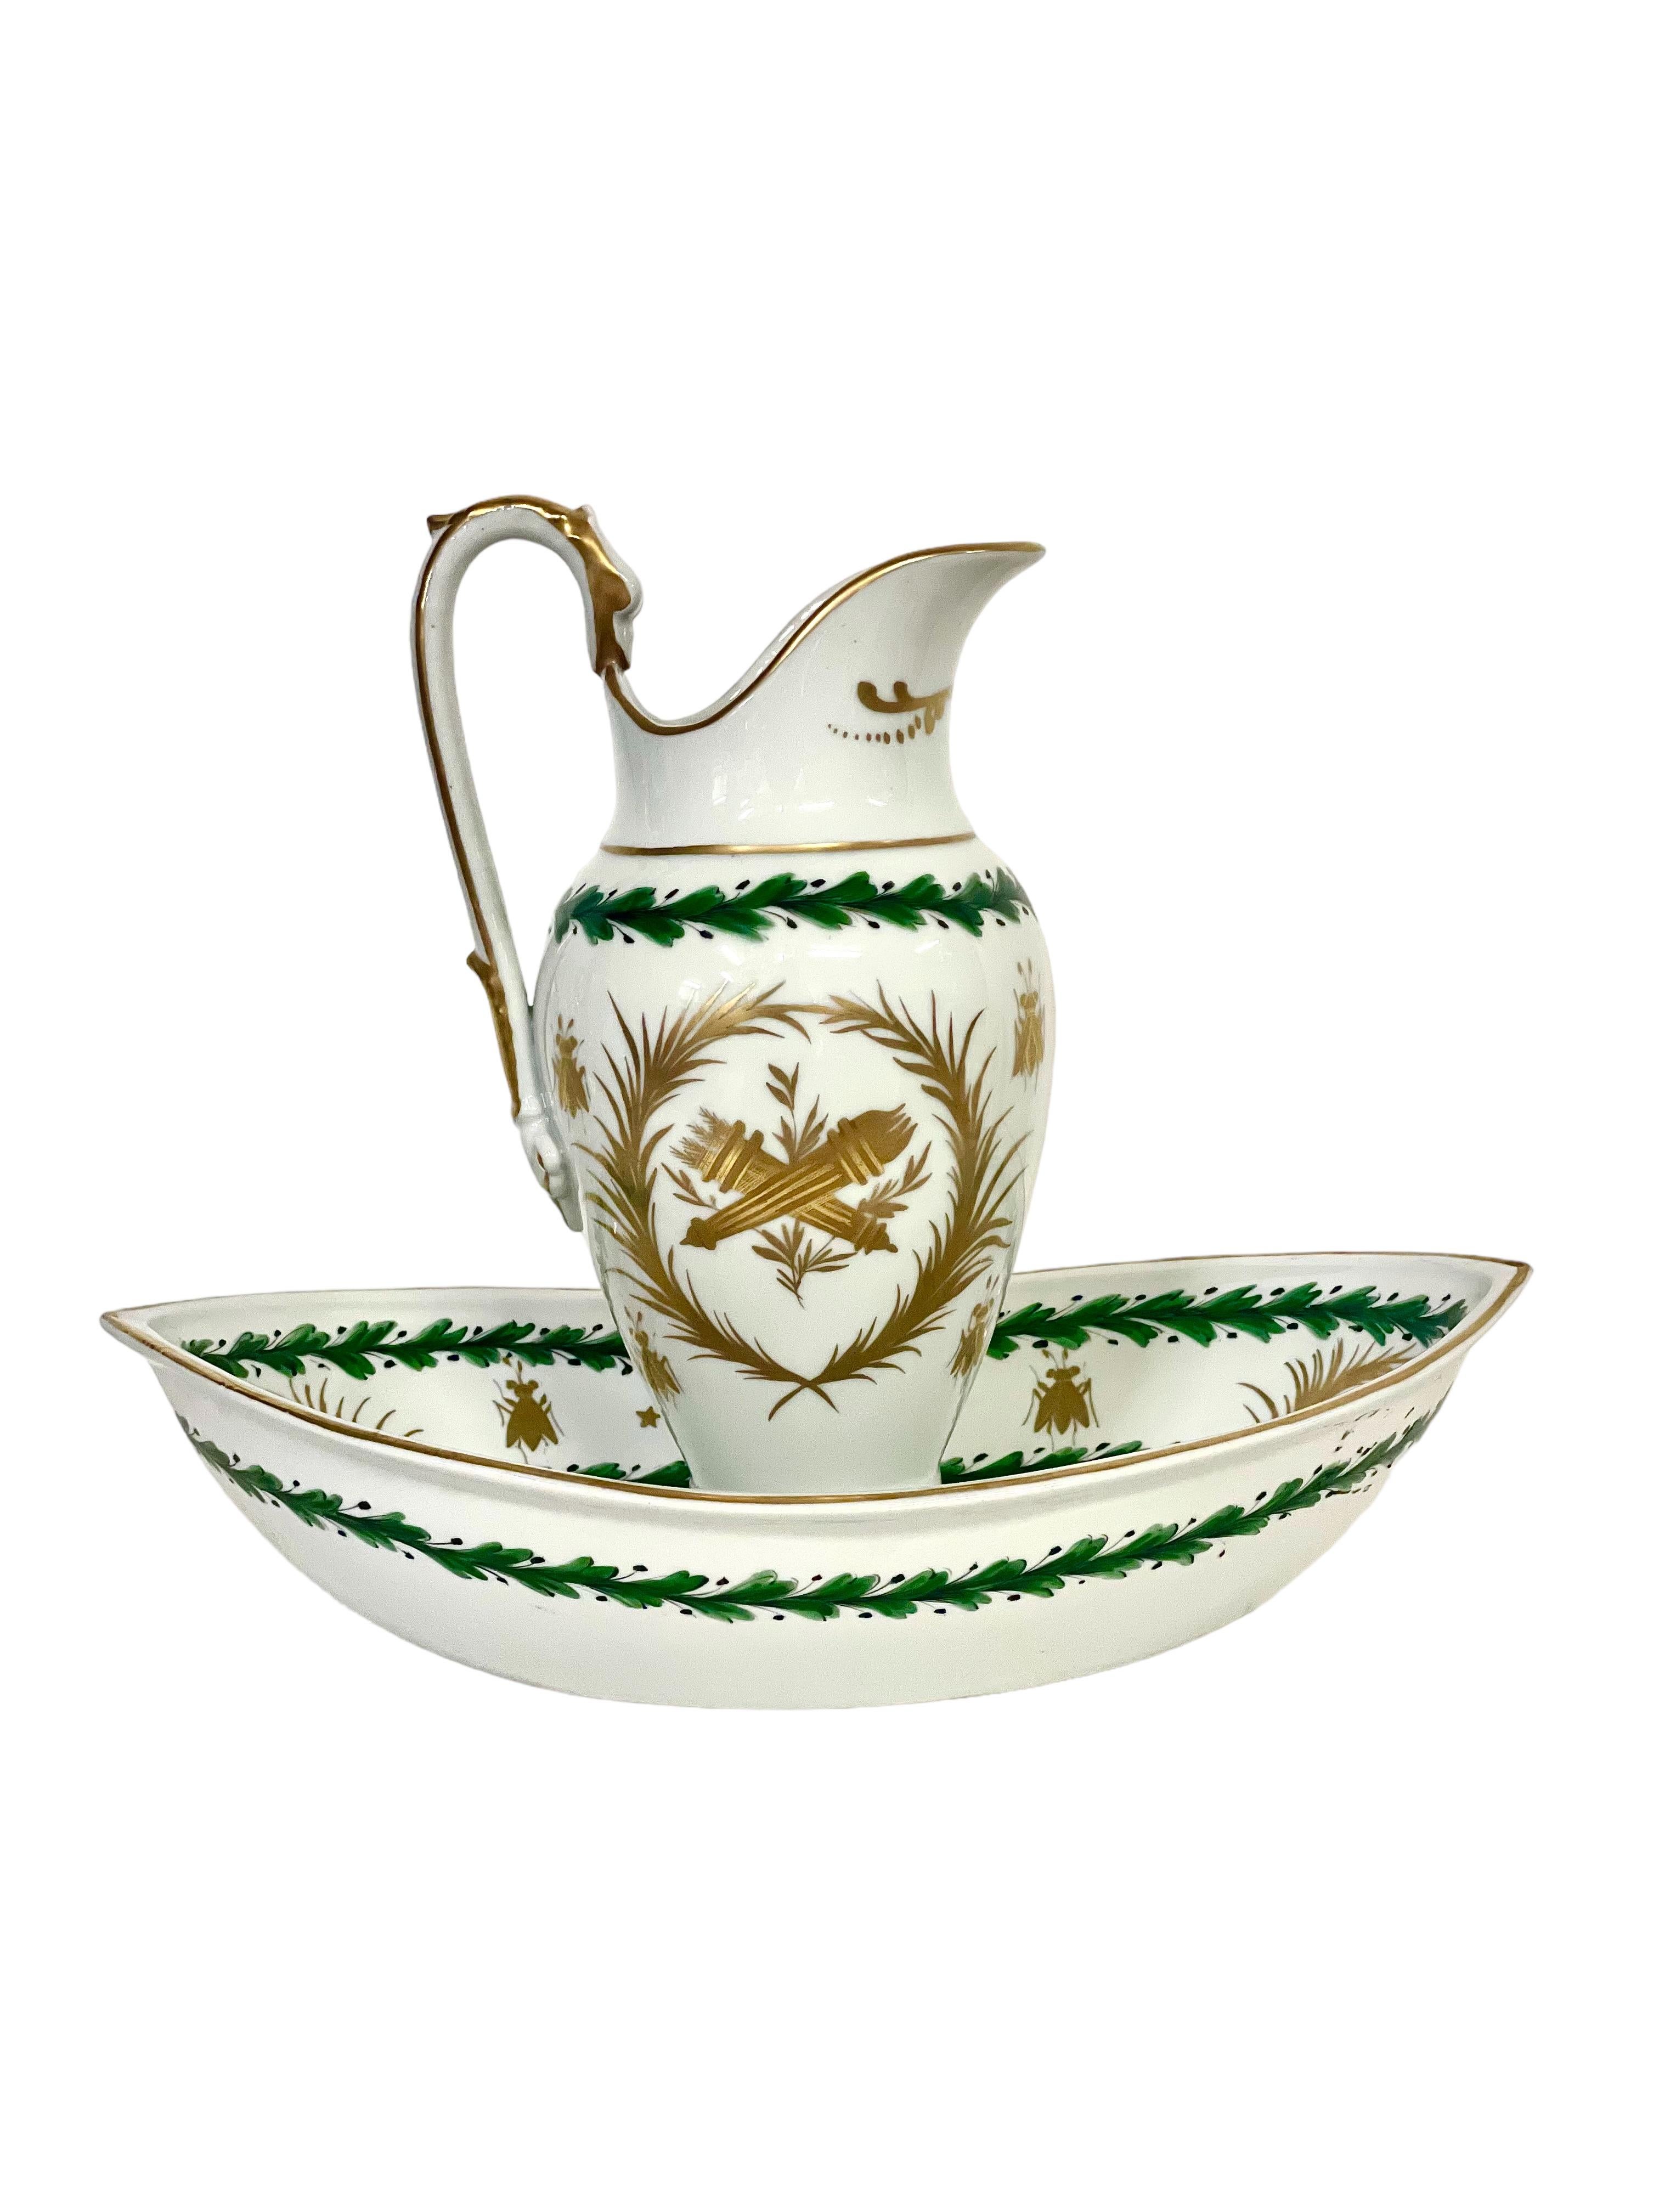 French Empire Period Paris Porcelain Basin and Pitcher with Napoleonic Emblems For Sale 9